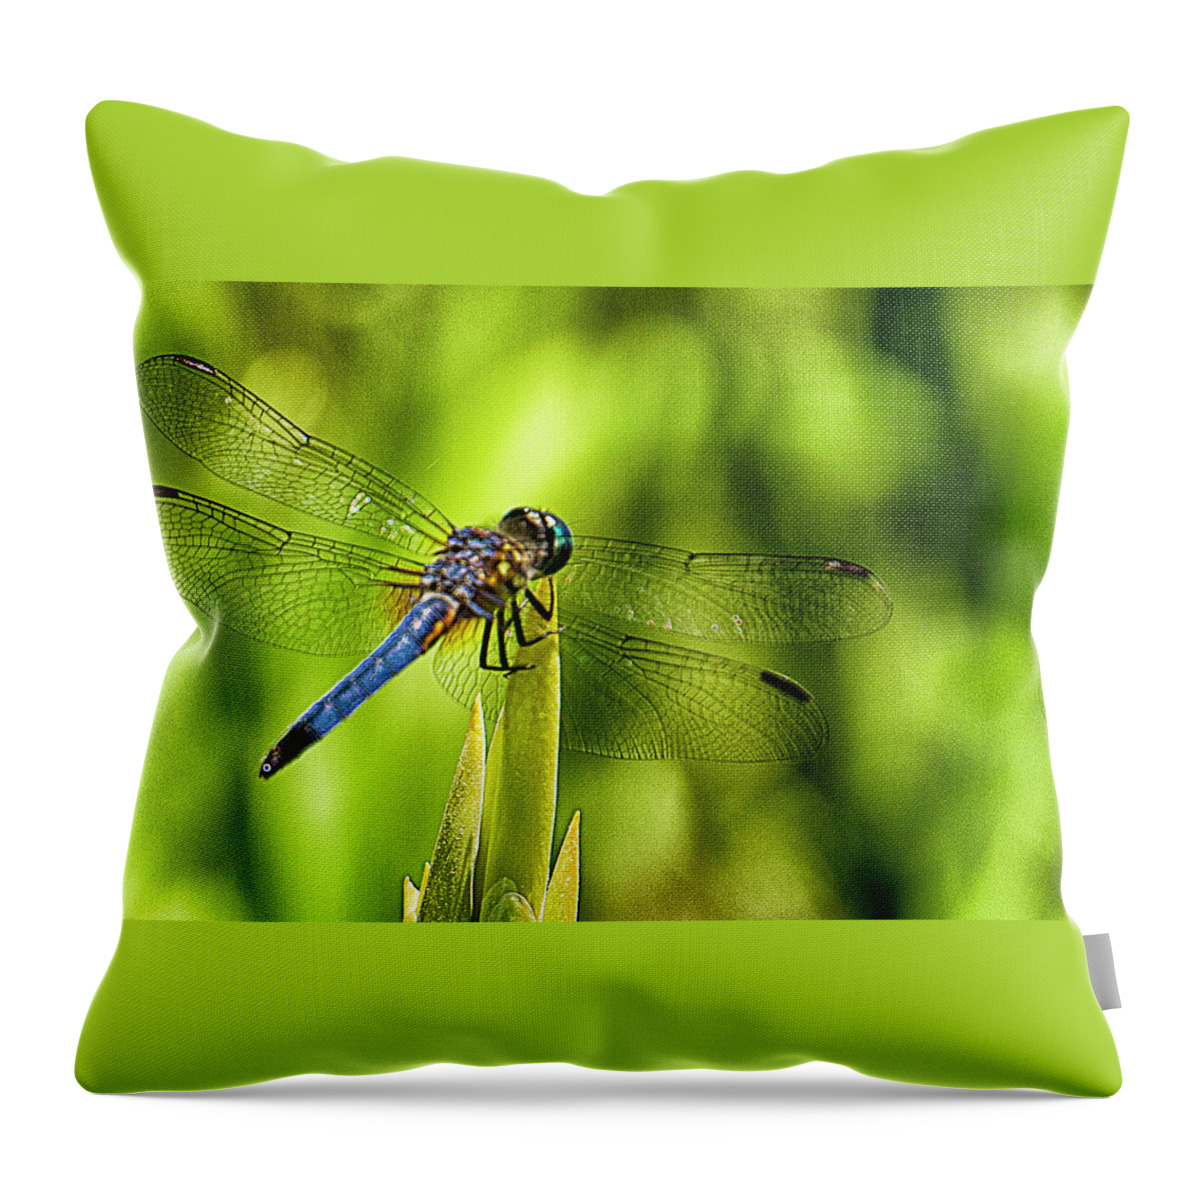 Dragonfly Throw Pillow featuring the photograph Pensive Dragon by Bill Barber